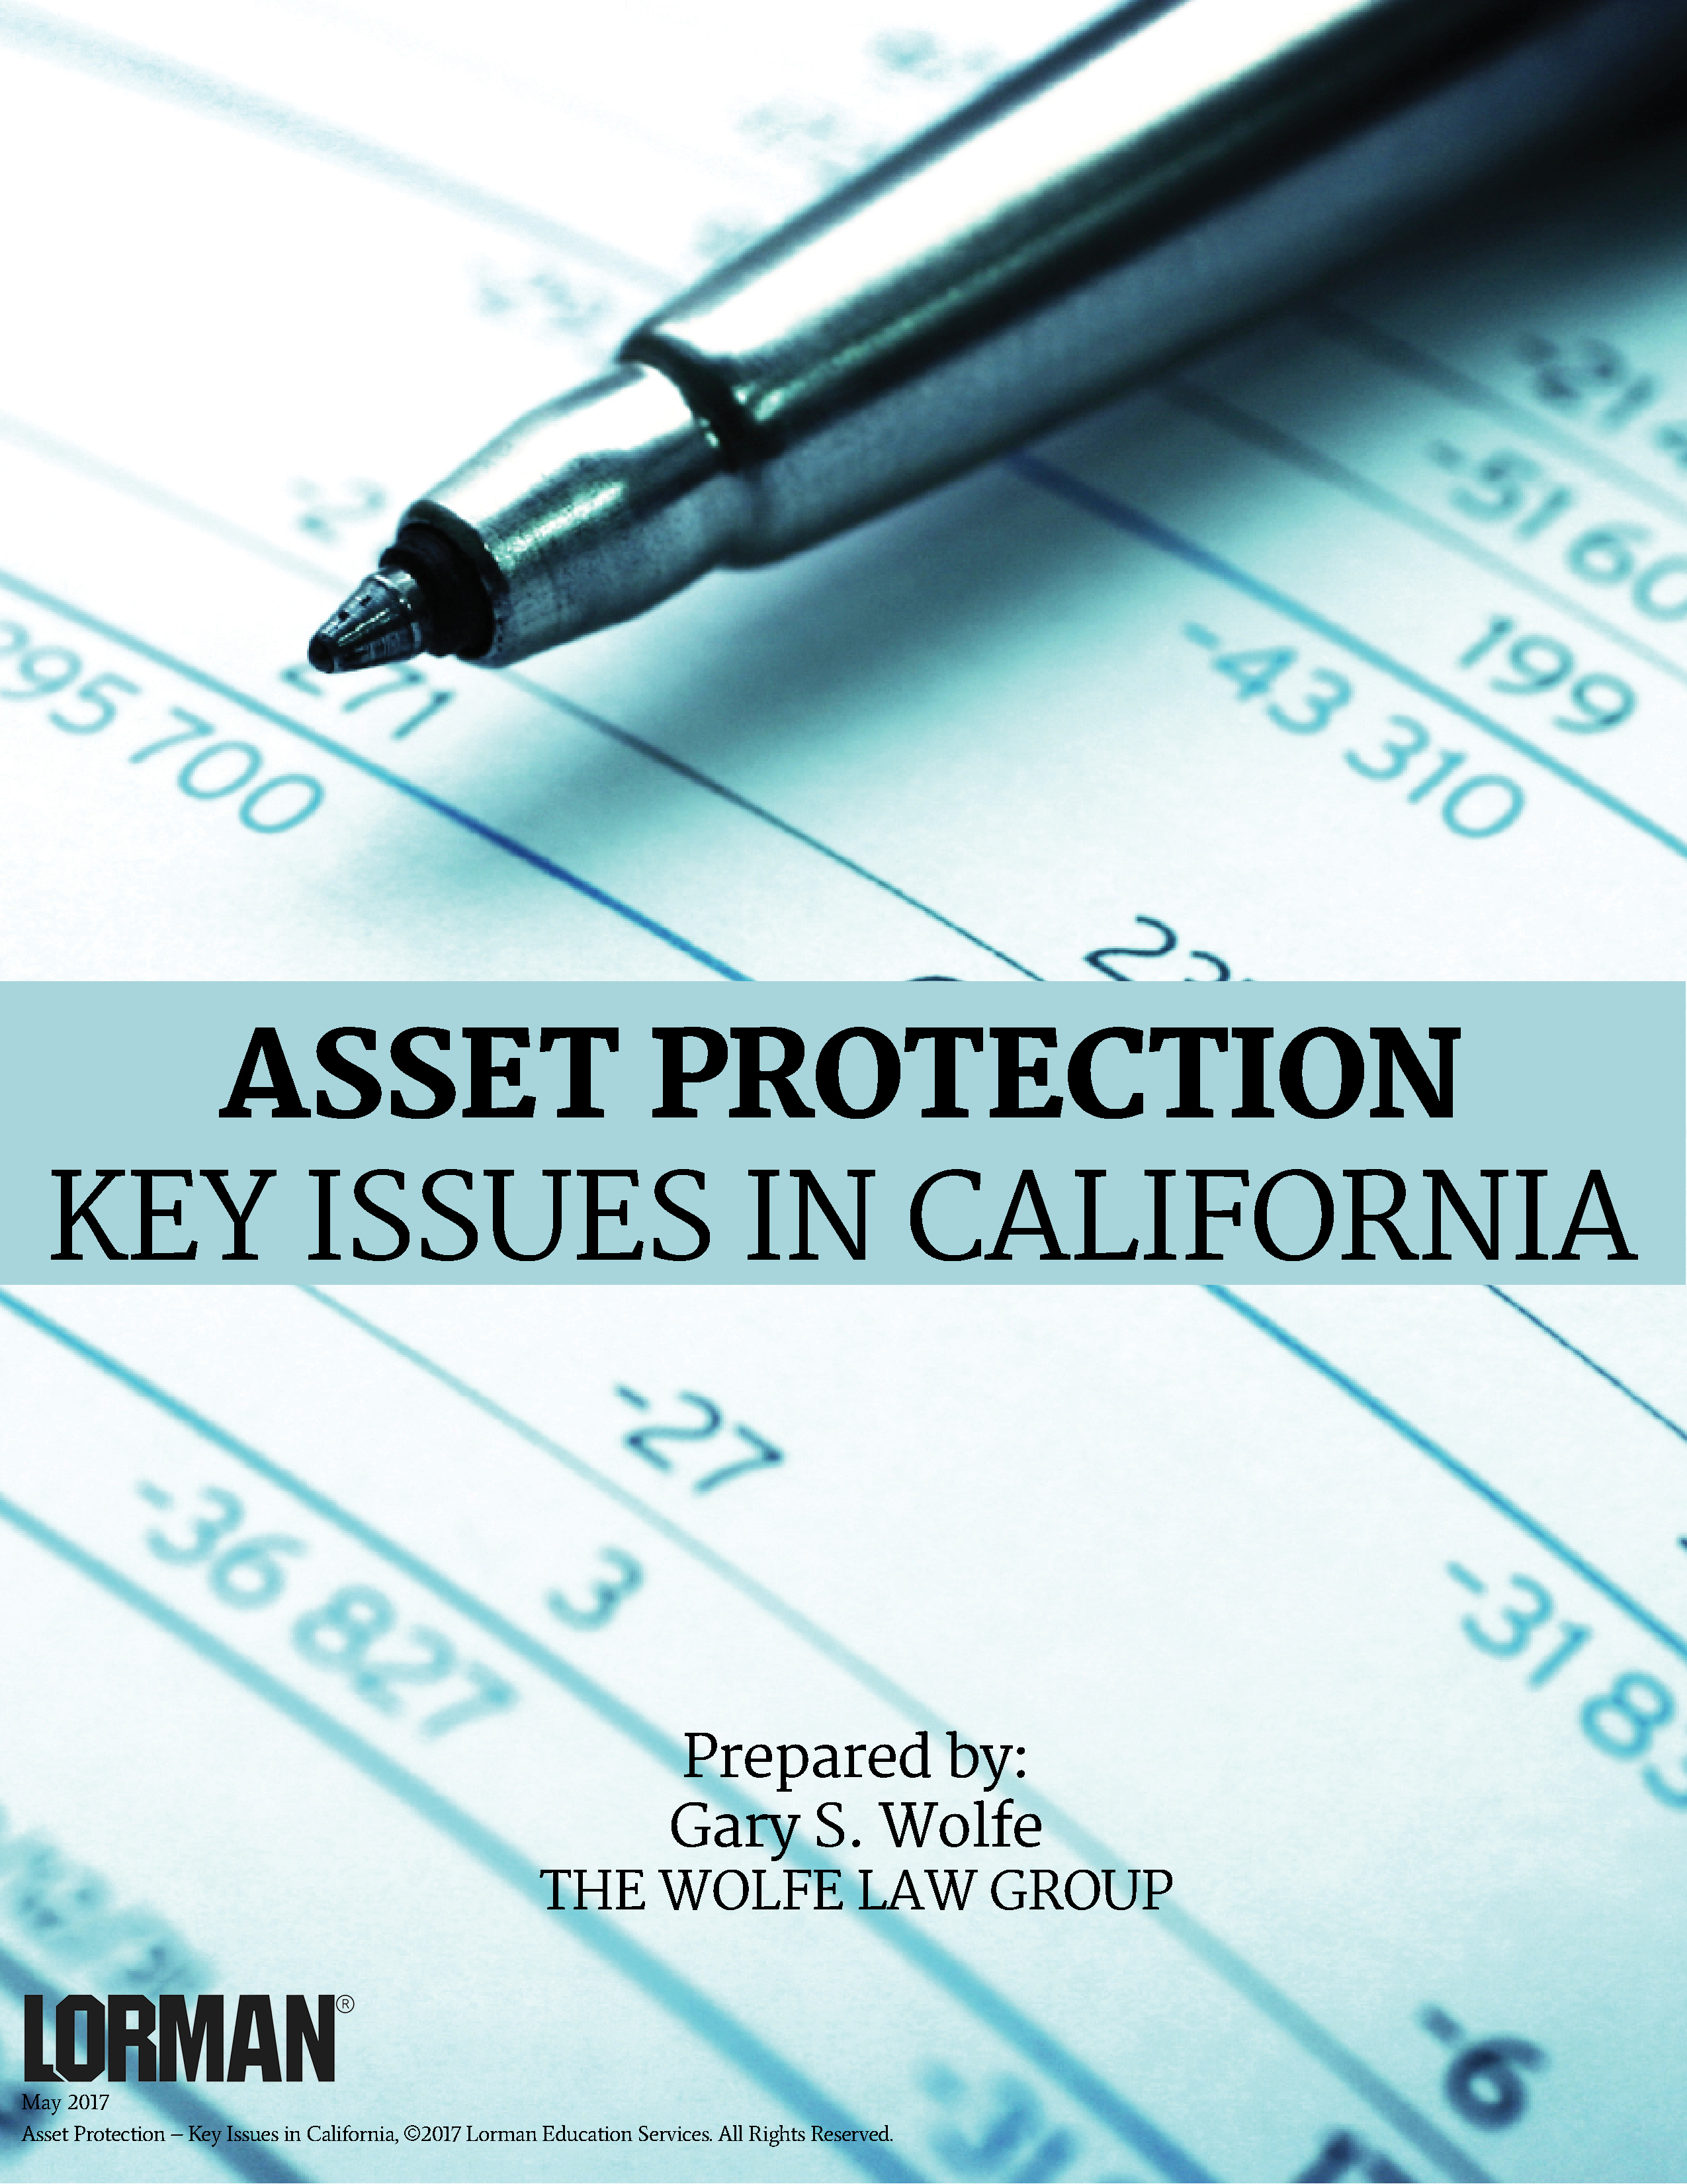 Asset Protection - Key Issues in California